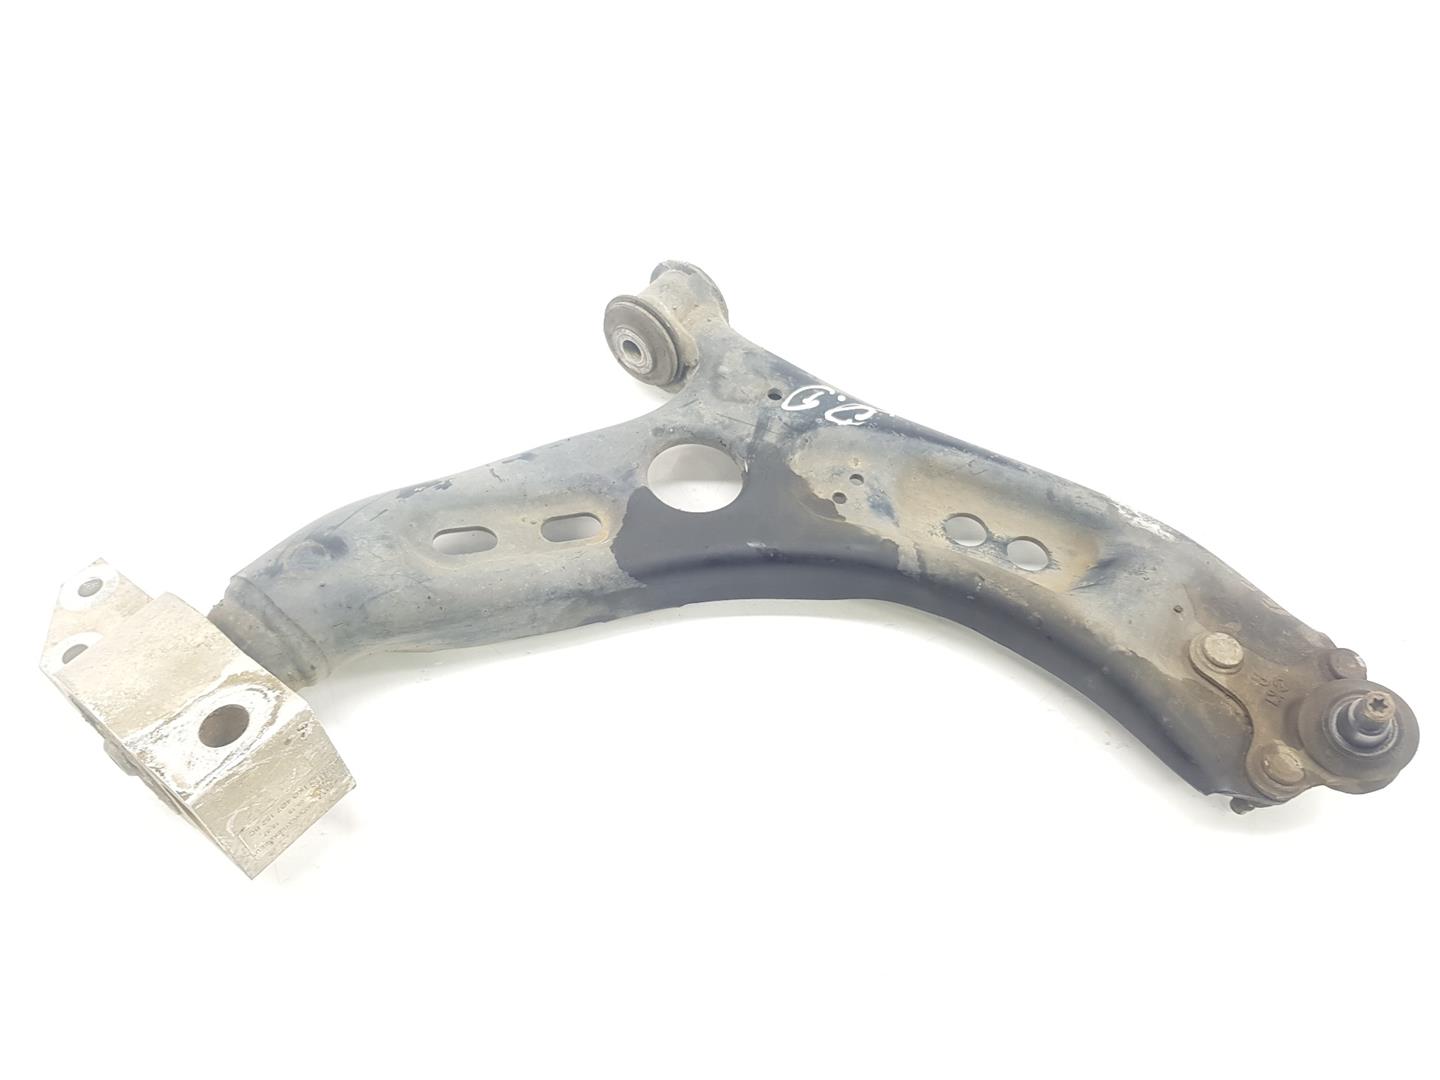 VOLKSWAGEN Touran 1 generation (2003-2015) Front Right Arm 1K0407152BC, 1K0407152BC 24224444